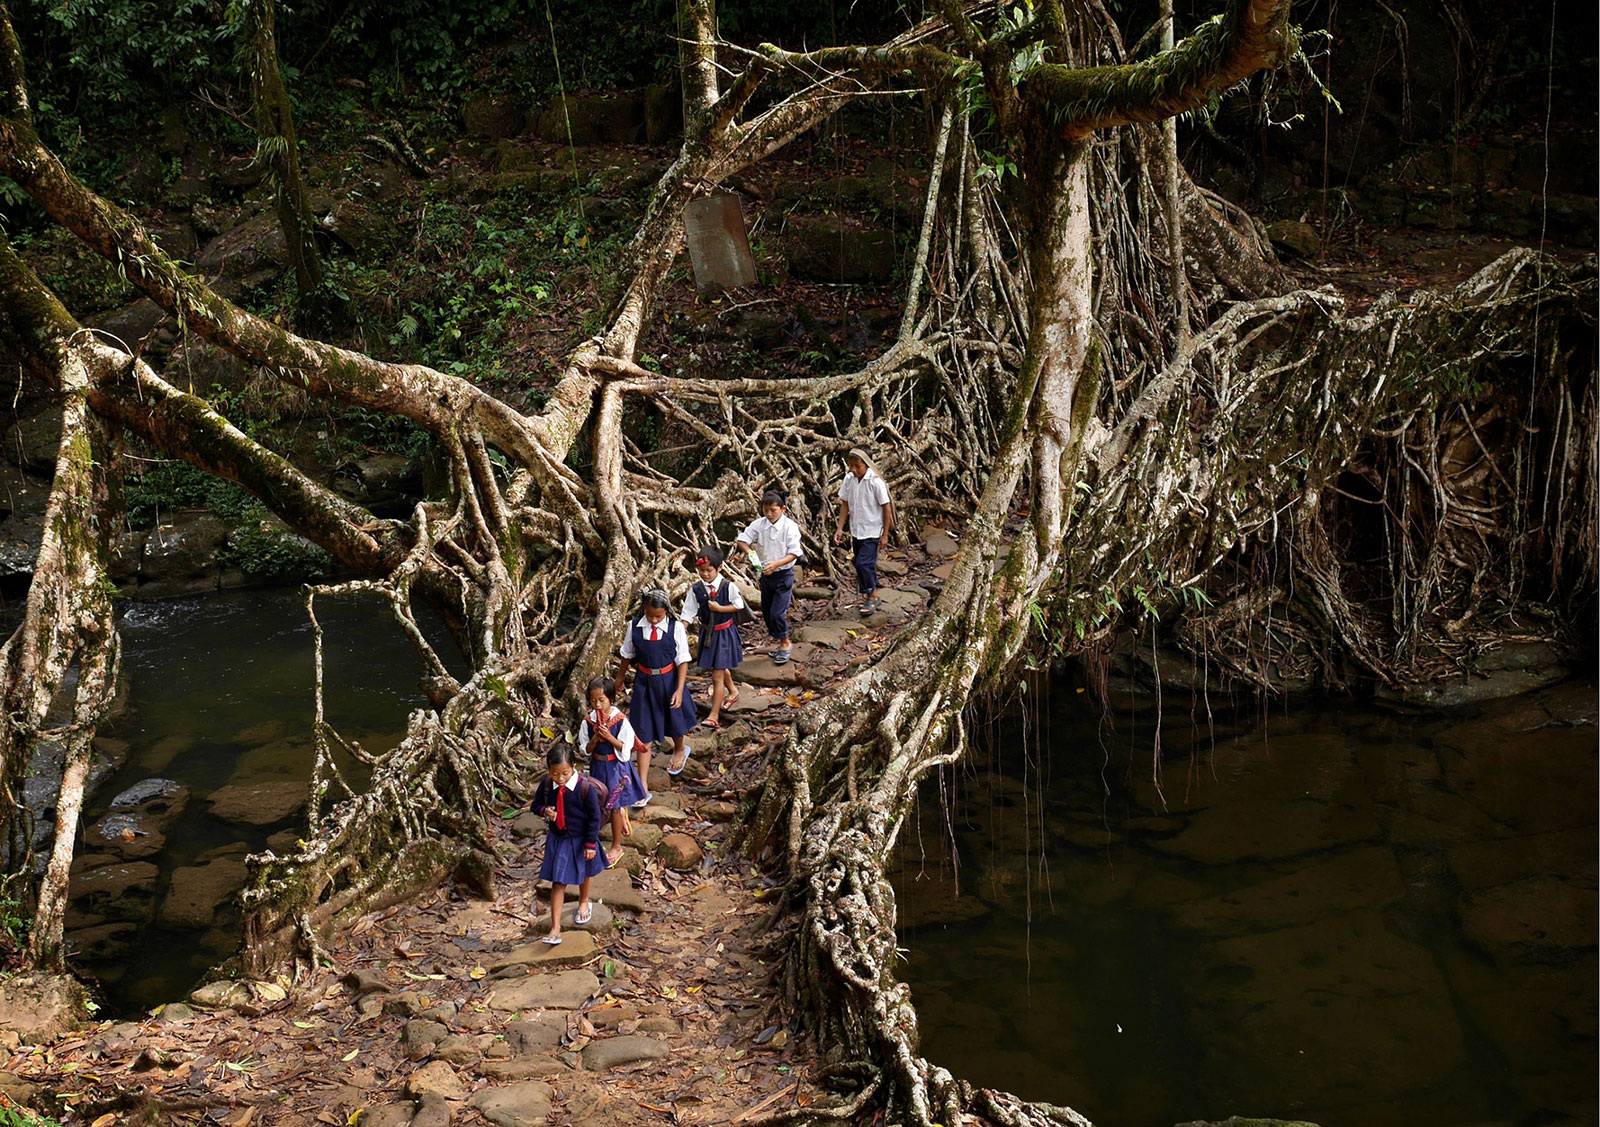 Students travel through a forest and across a tree root bridge to get to class in India.